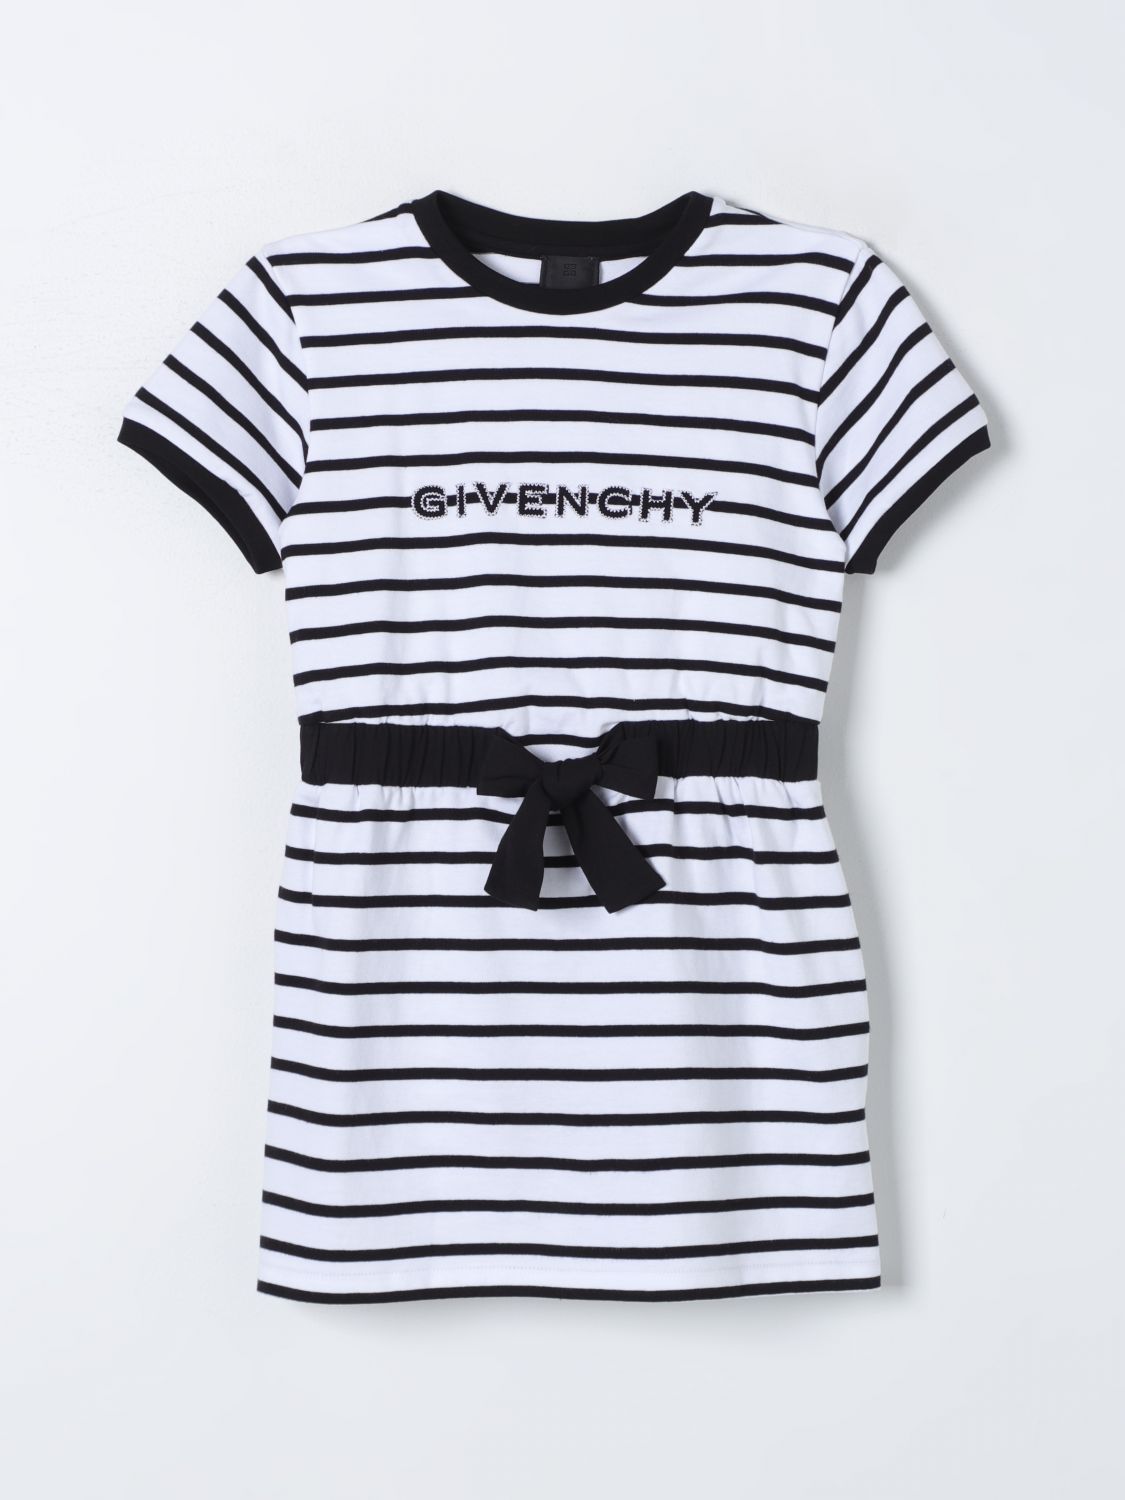 Givenchy Dress  Kids Color White